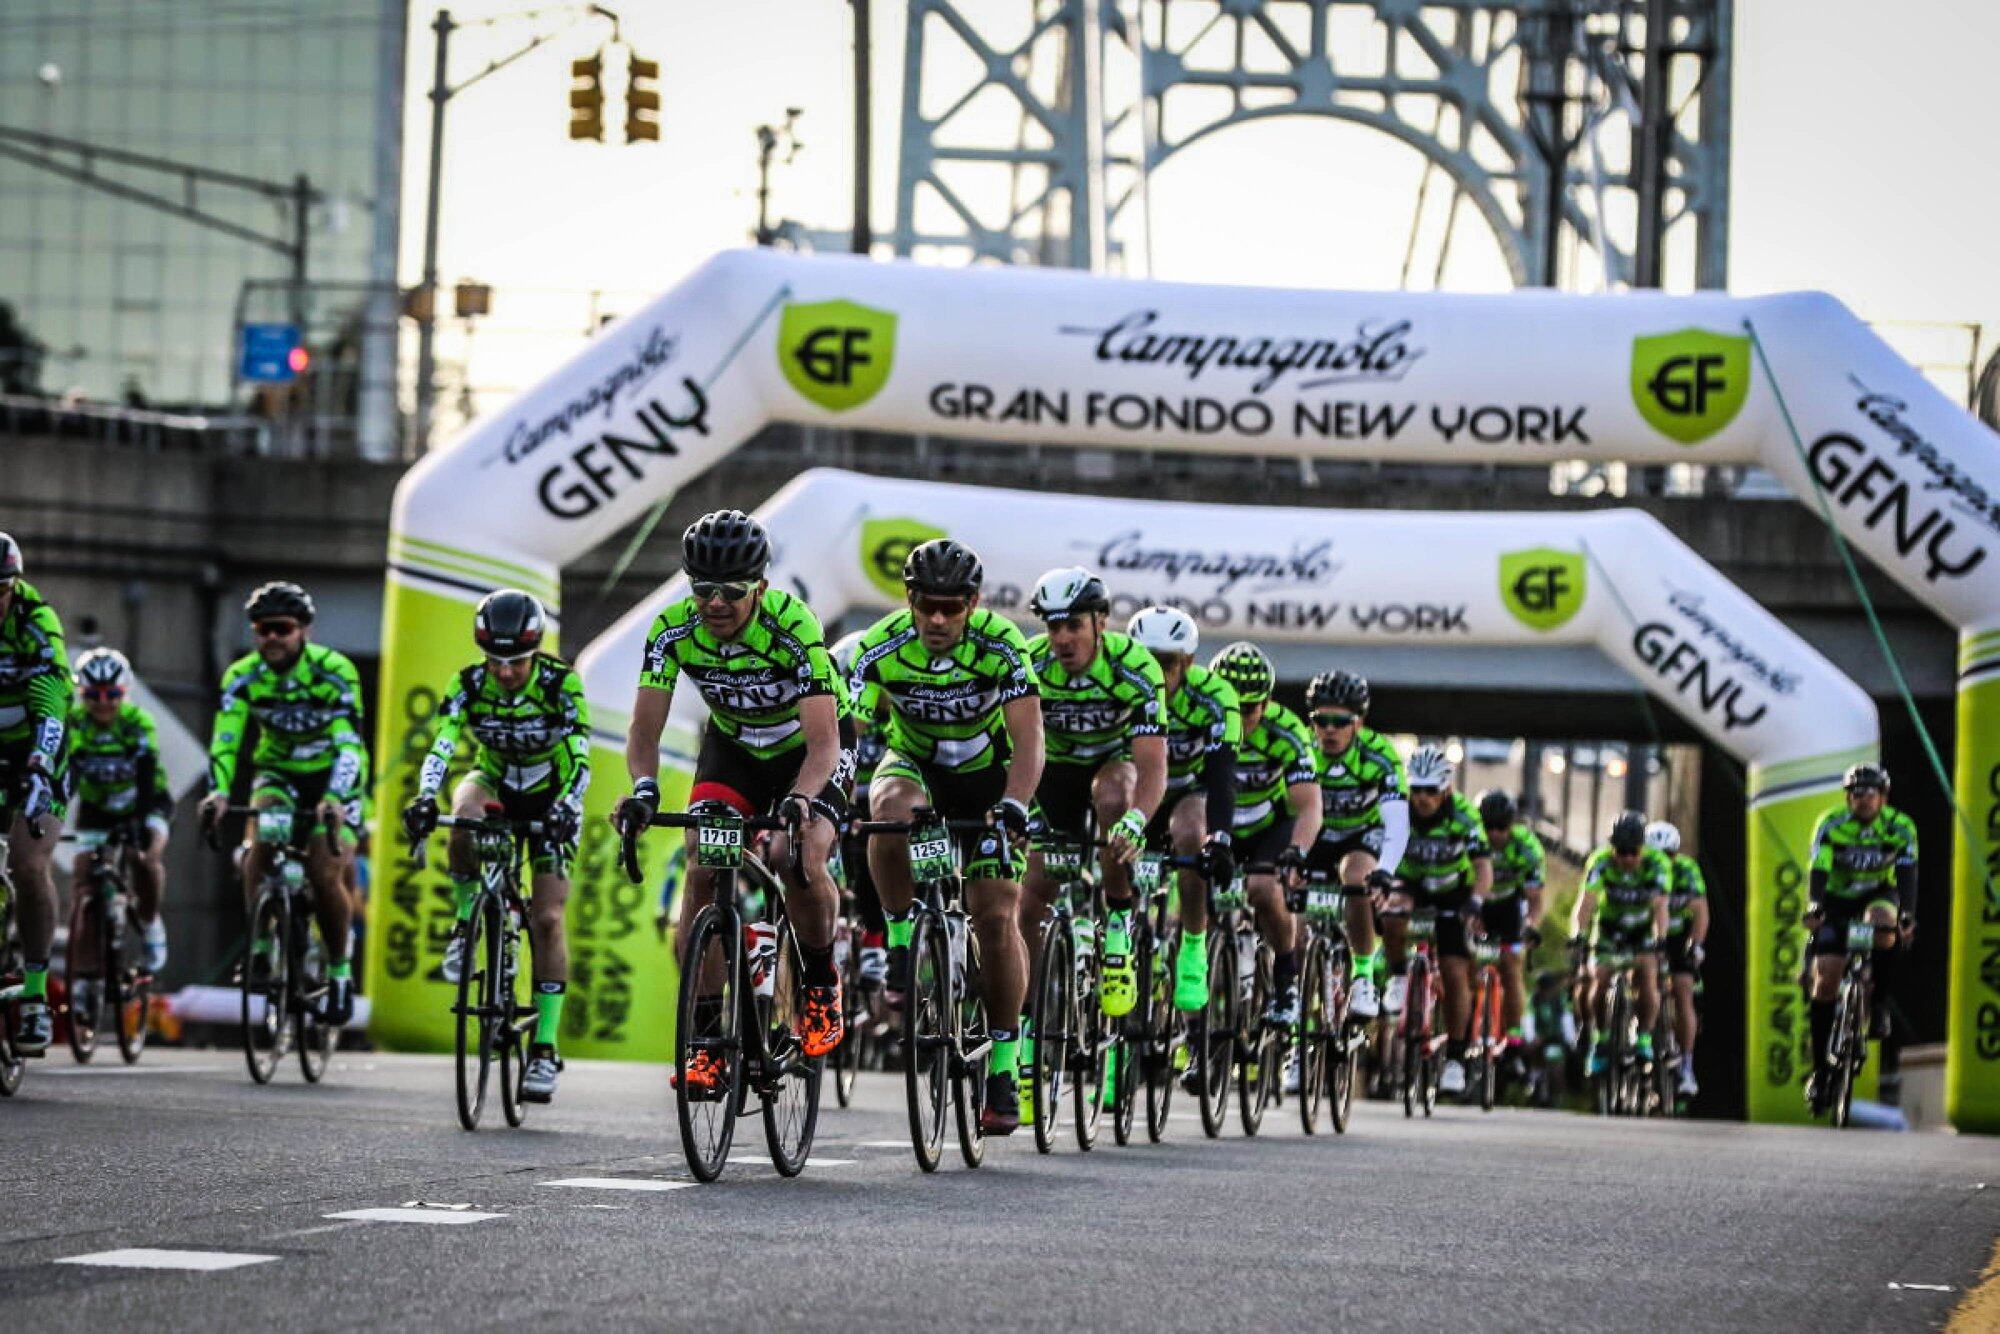 12-facts-about-gran-fondo-new-york